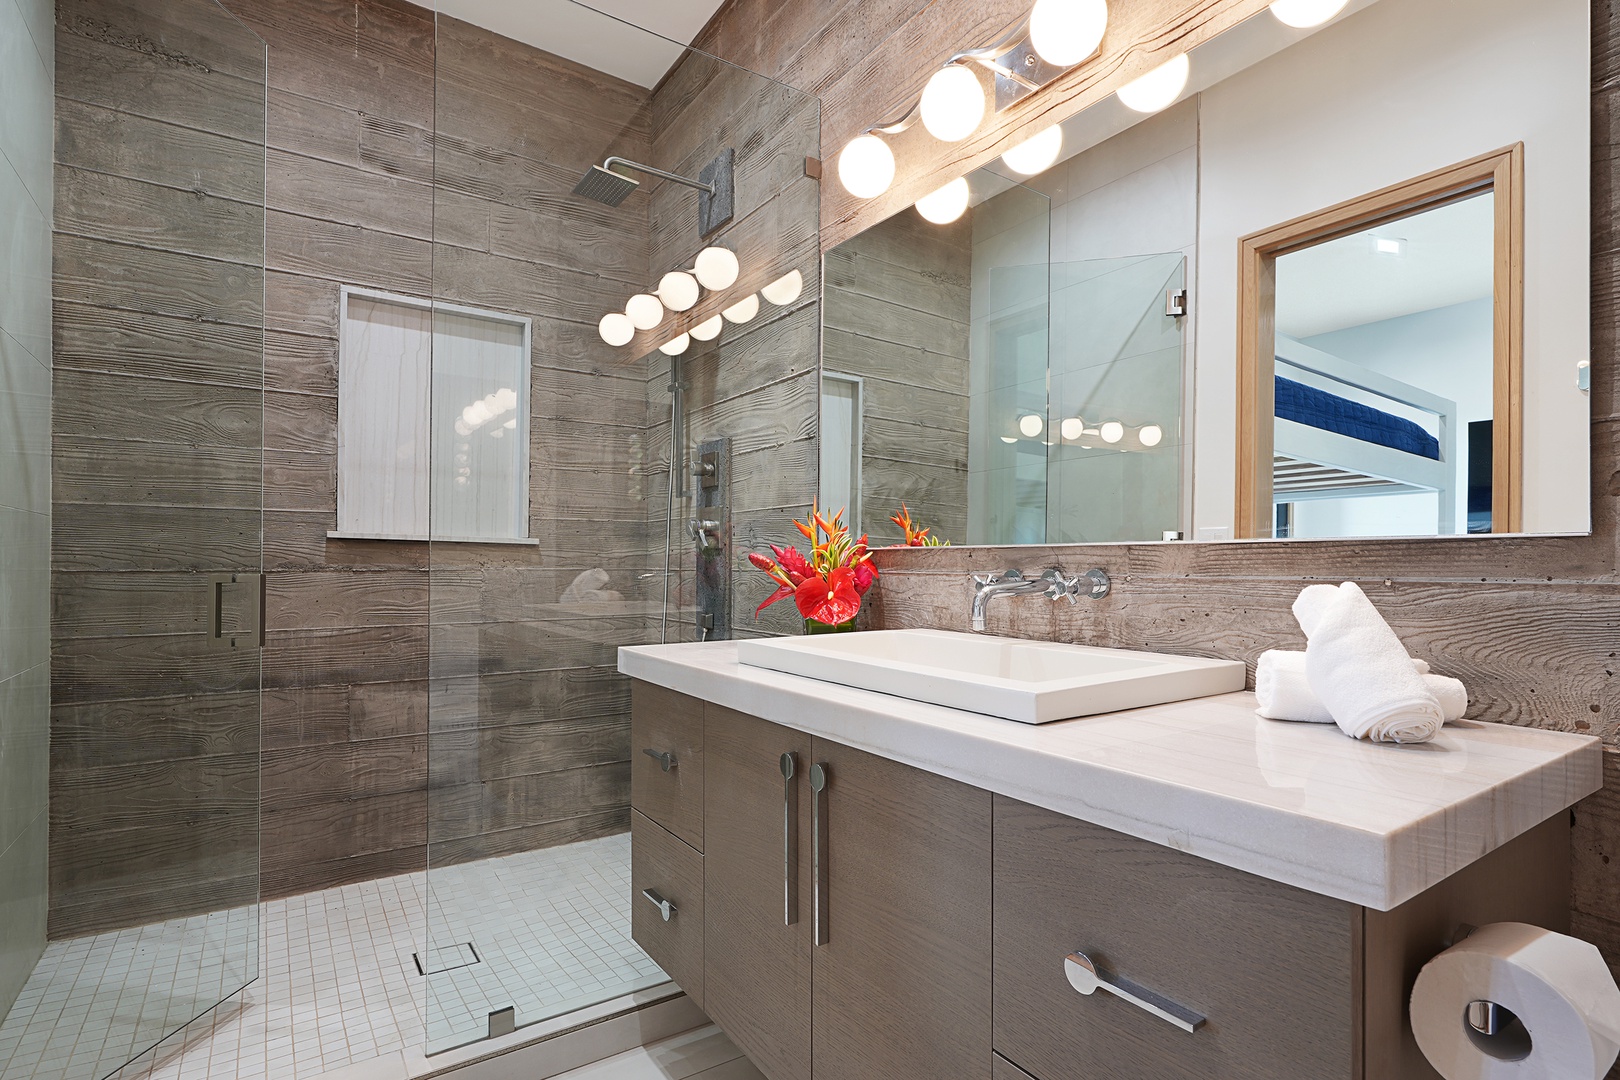 Koloa Vacation Rentals, Hale Keaka at Kukui'ula - Rejuvenate in this modern bunk room ensuite, complete with sleek finishes, a spacious shower, and vibrant touches of color for a refreshing start or end to your day.